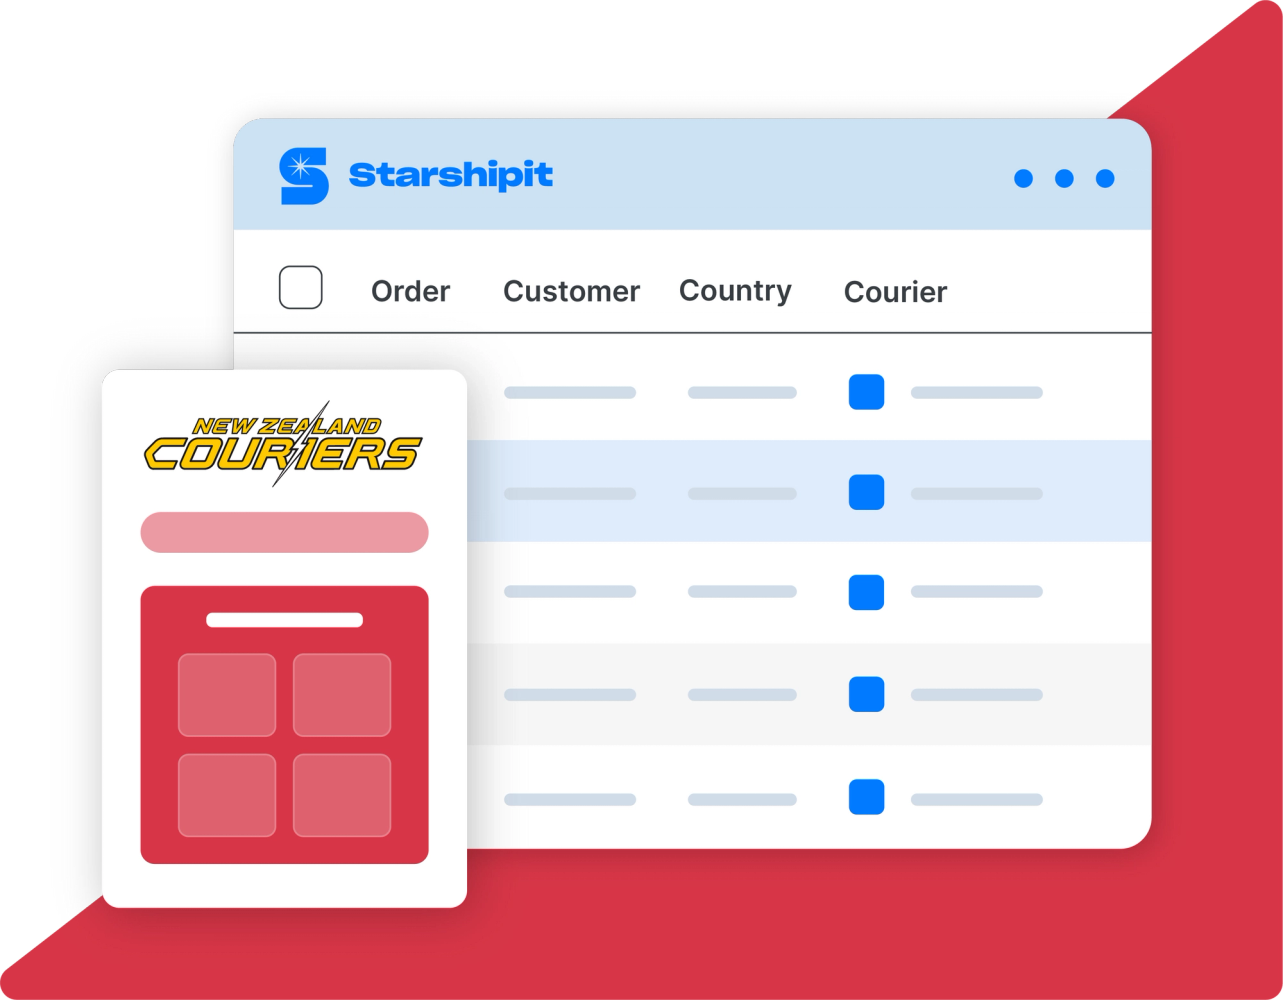 Starshipit and New Zealand Couriers Integration